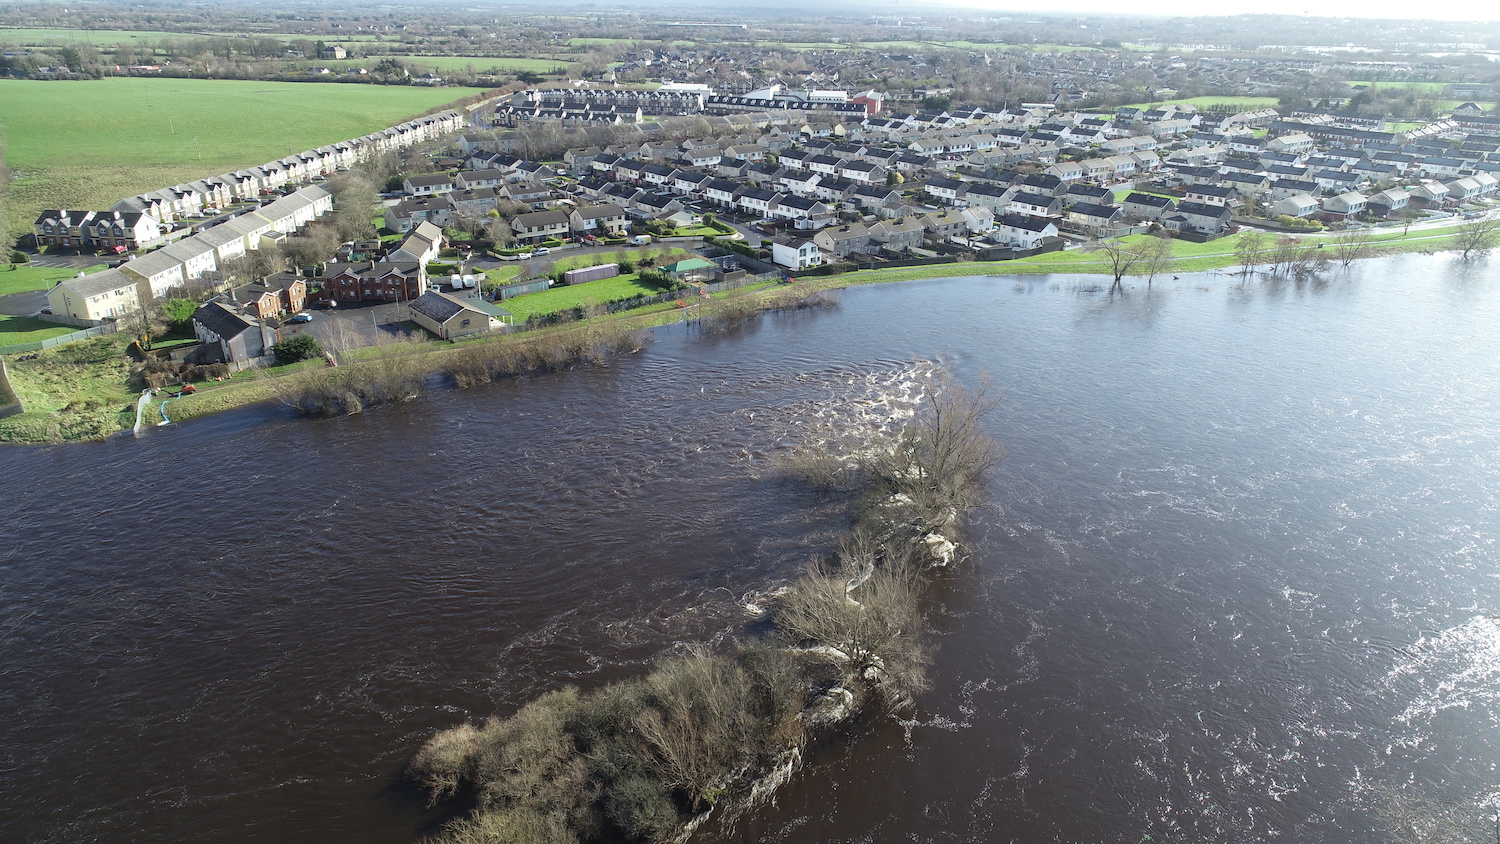 Limerick Flood Relief Scheme - Limerick City and County Council is inviting members of the public and other stakeholders to give their views.